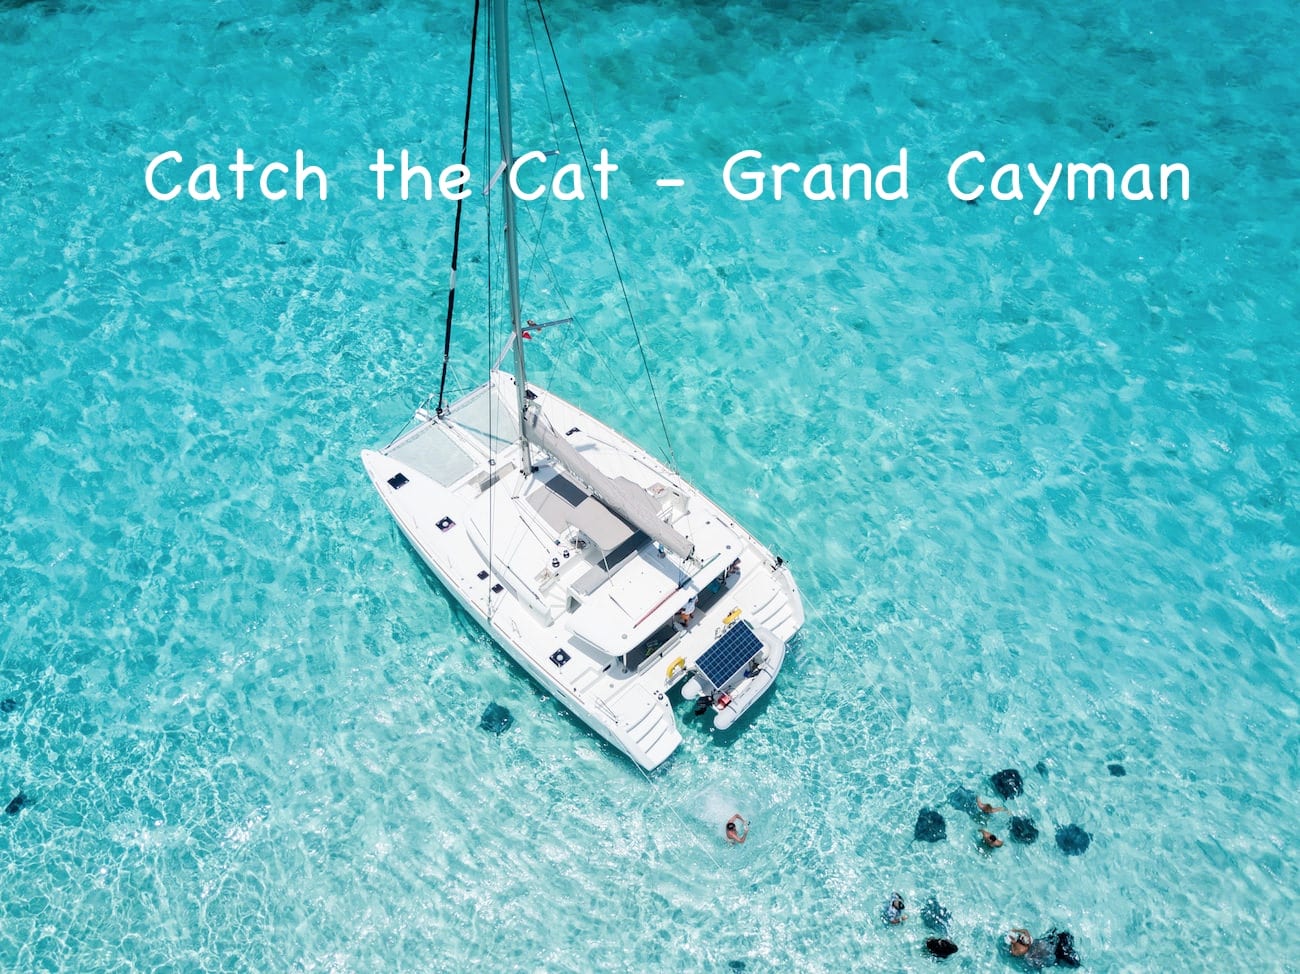 Catch the Cat at stingray city grand cayman.